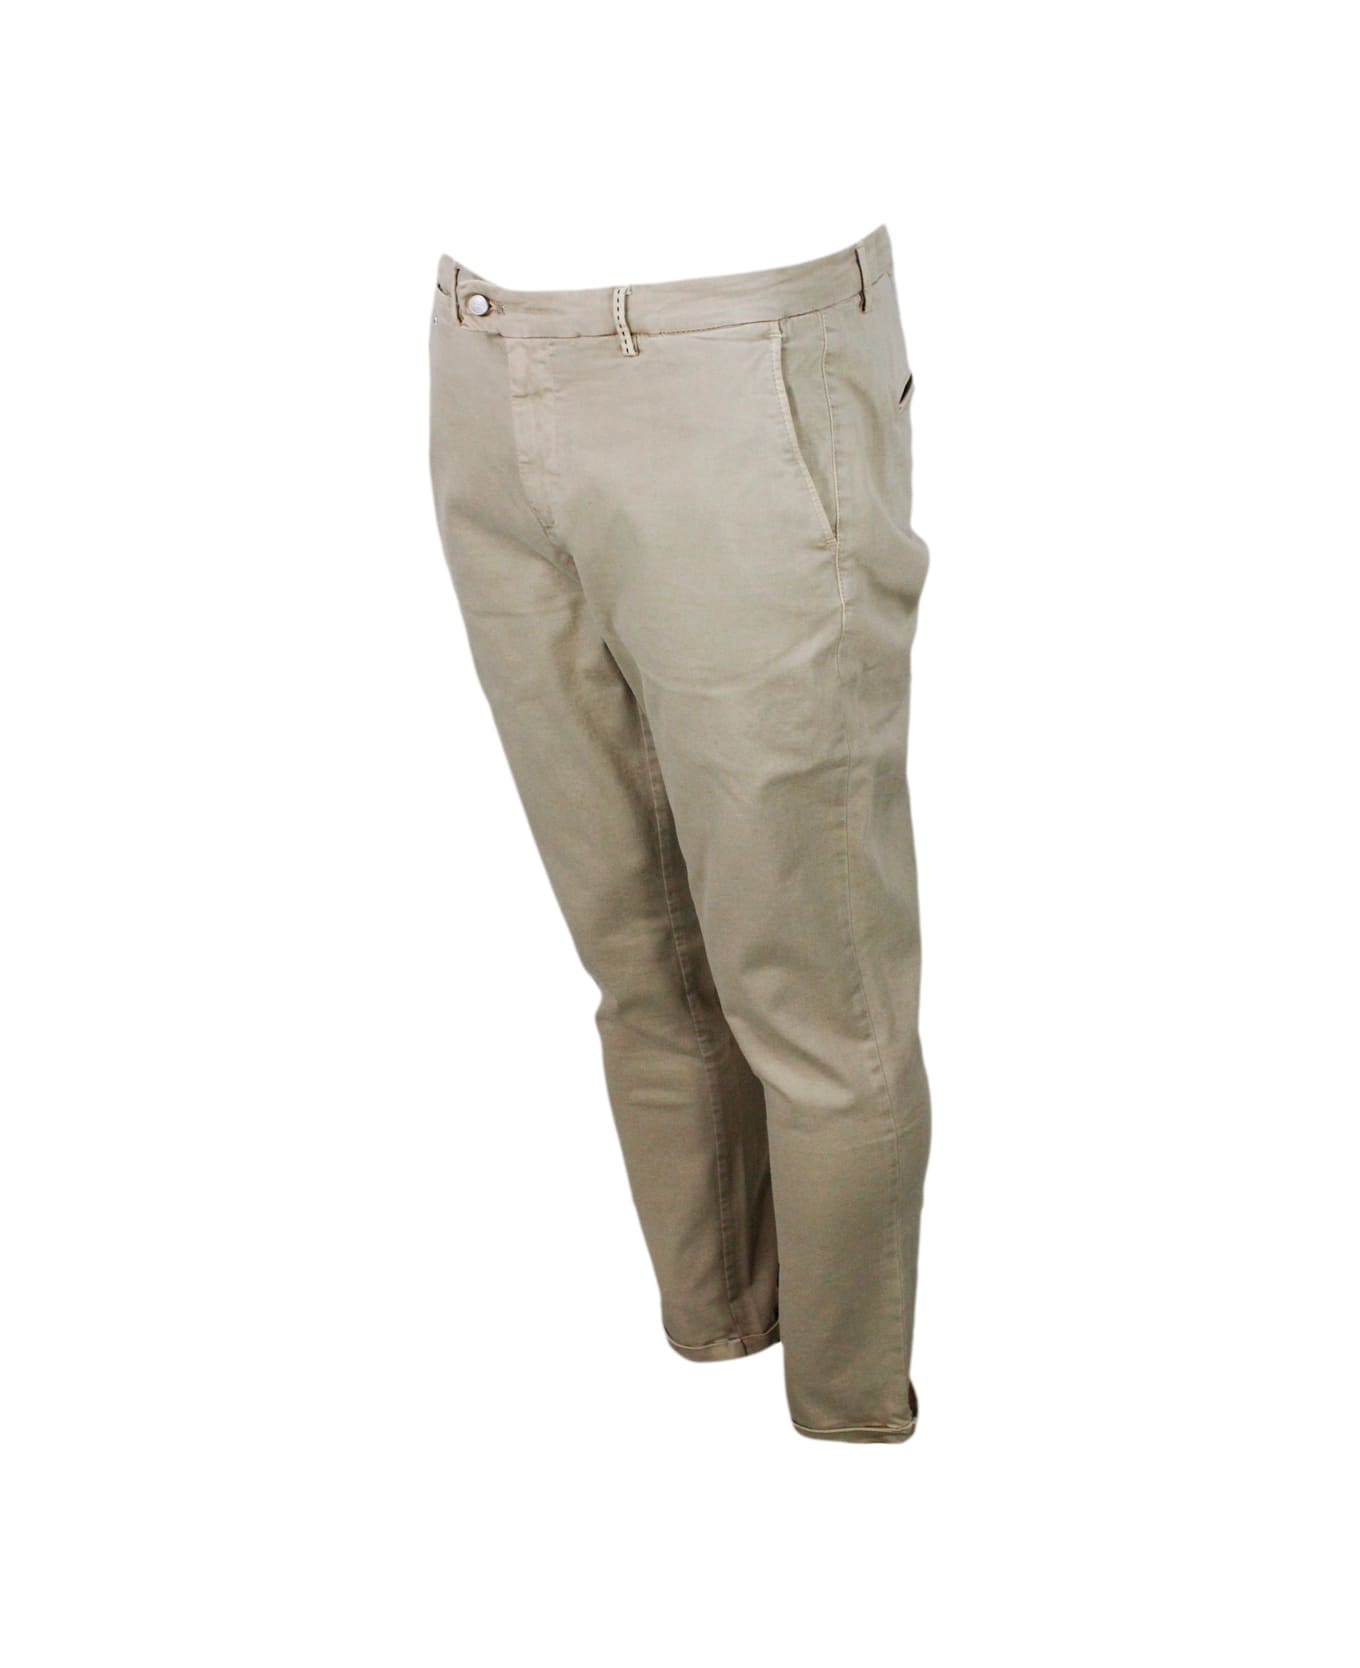 Sartoria Tramarossa Luis Trousers With Chino Pockets In Stretch Elastic Cotton With Tone-on-tone Tailored Stitching And Suede Tab And Zip Closure - Sahara Desert